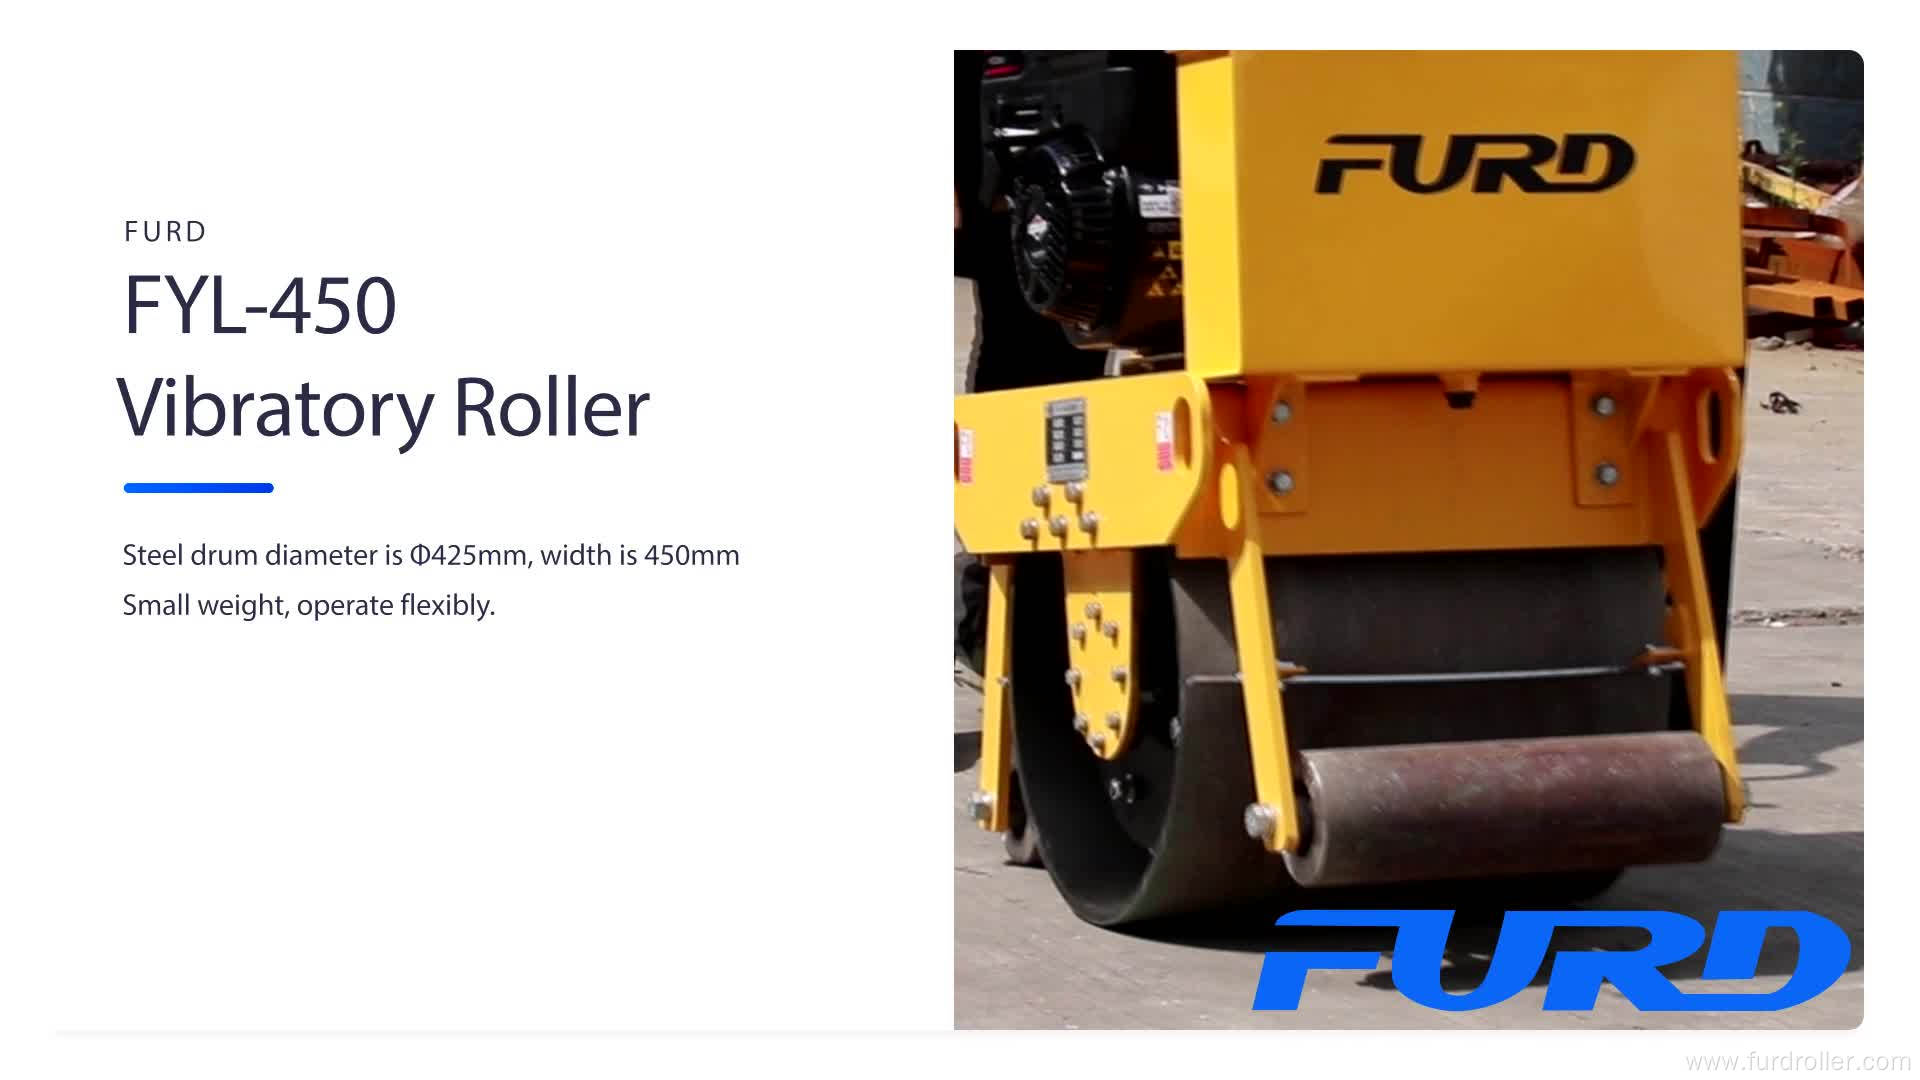 Baby Self-Propelled Vibratory Hand Road Roller Baby Self-Propelled Vibratory Hand Road Roller FYL-450